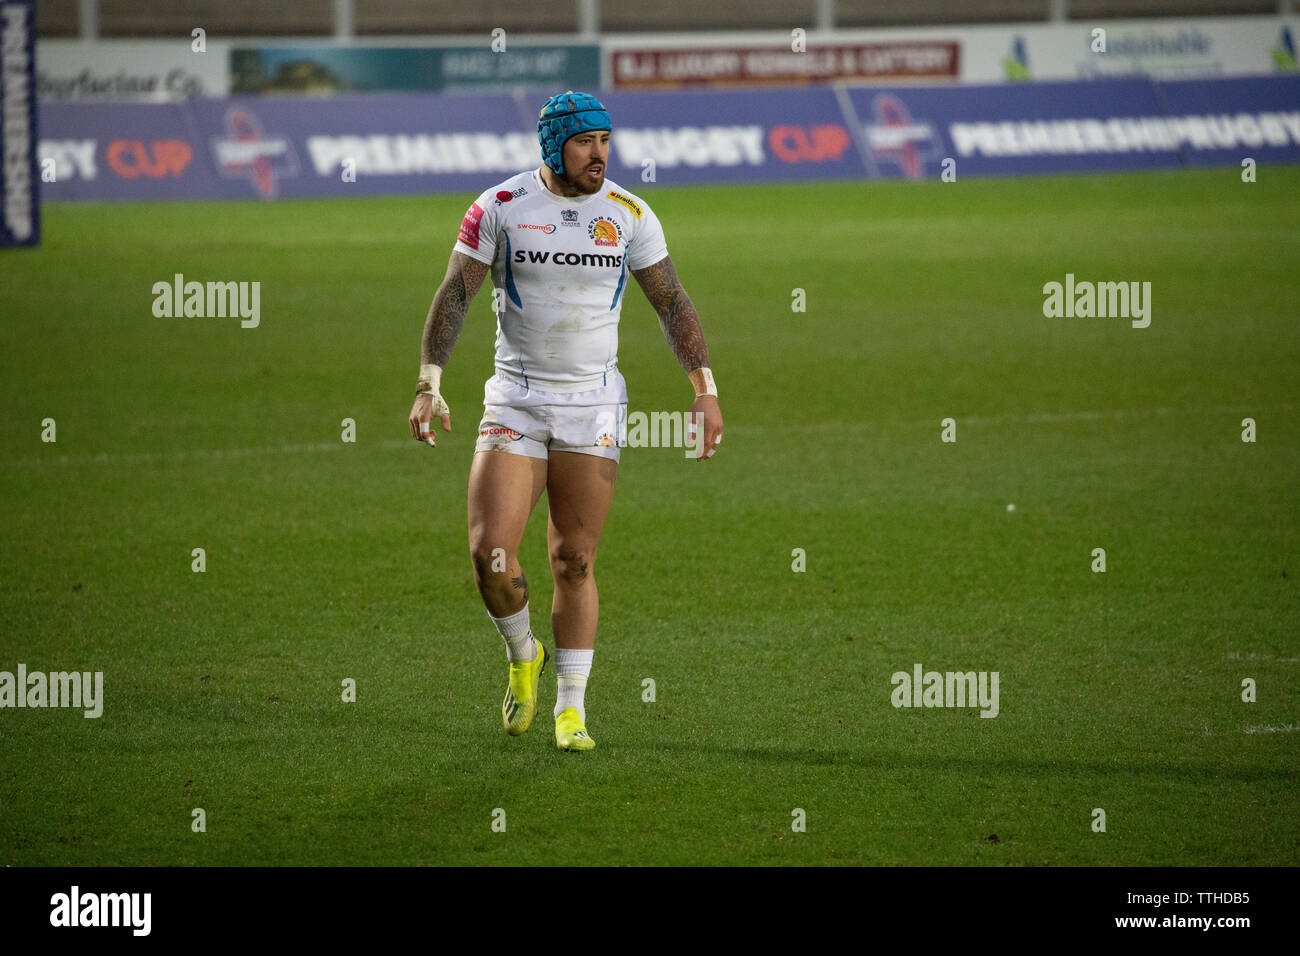 Exeter Chiefs winger Jack Nowell patrolling the field against Gloucester 2nd squad at Kingsholm stadium, Gloucester, UK Stock Photo